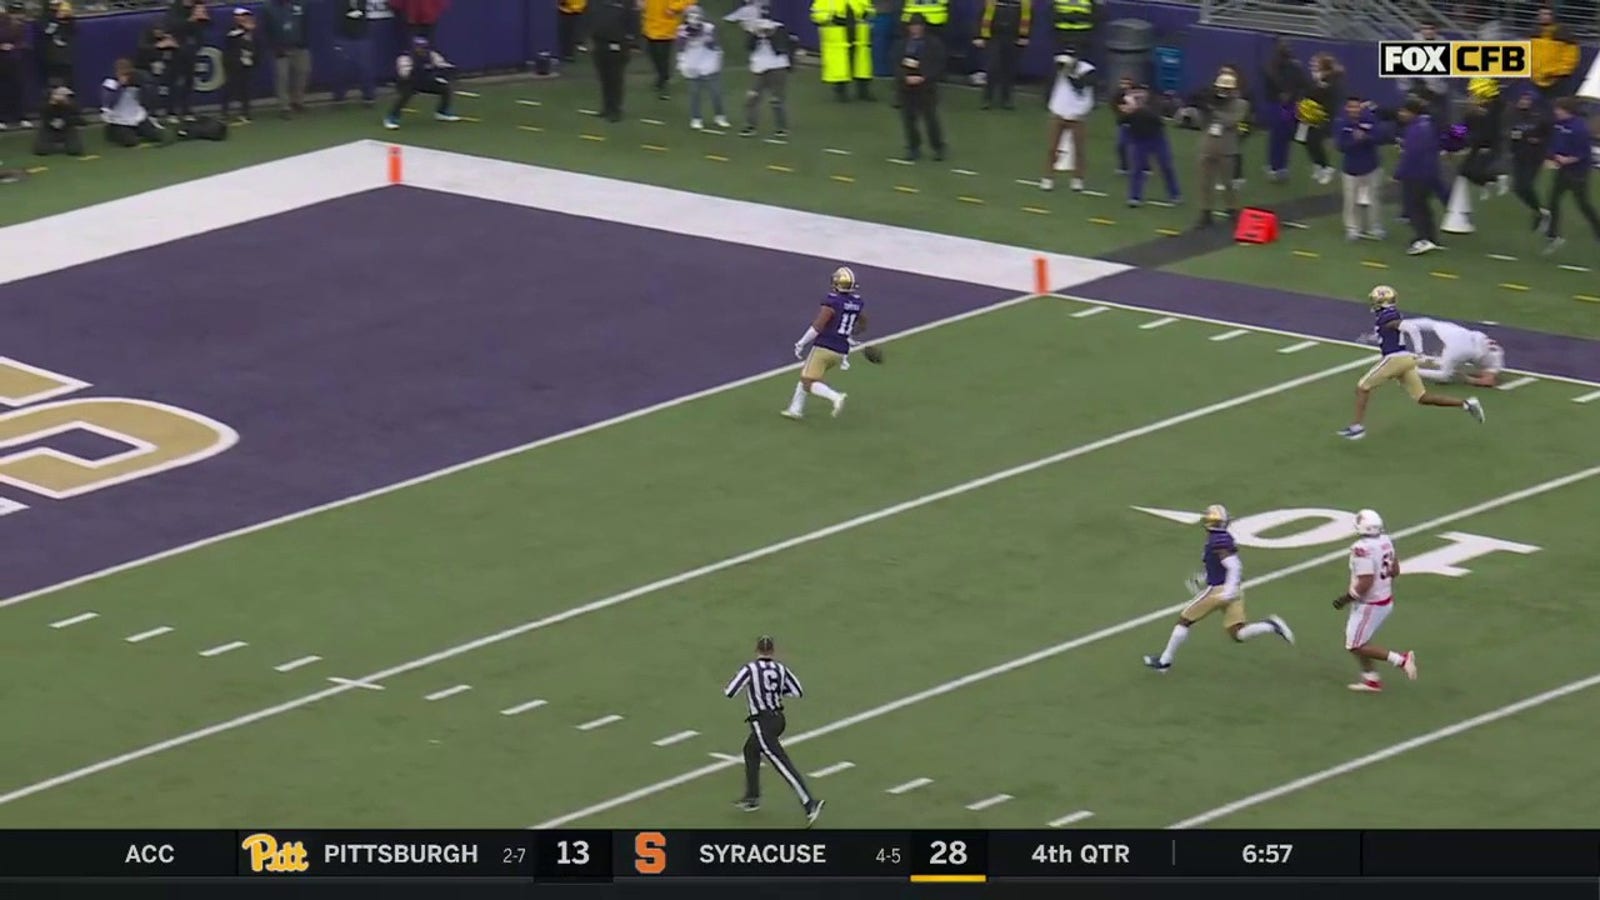  Washington's Alphonzo Tuputala gets an interception but drops the ball one yard shy of the endzone, resulting in Huskies forcing a Utah safety